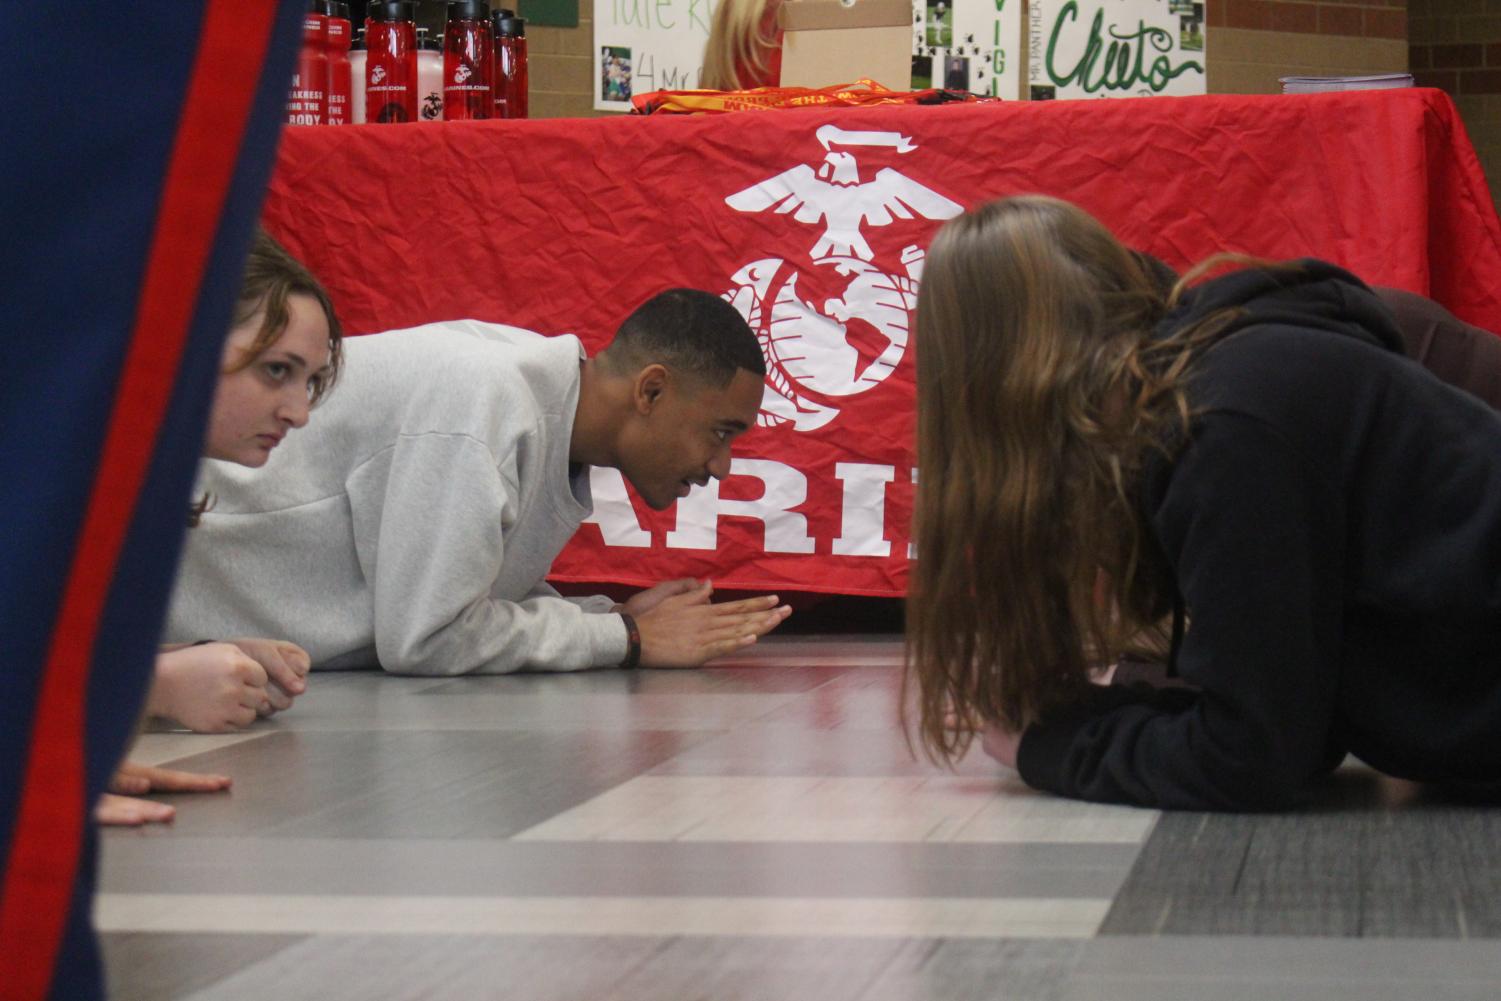 Marines+plank+competition+%28Photos+by+Abigail+Kuhn%29